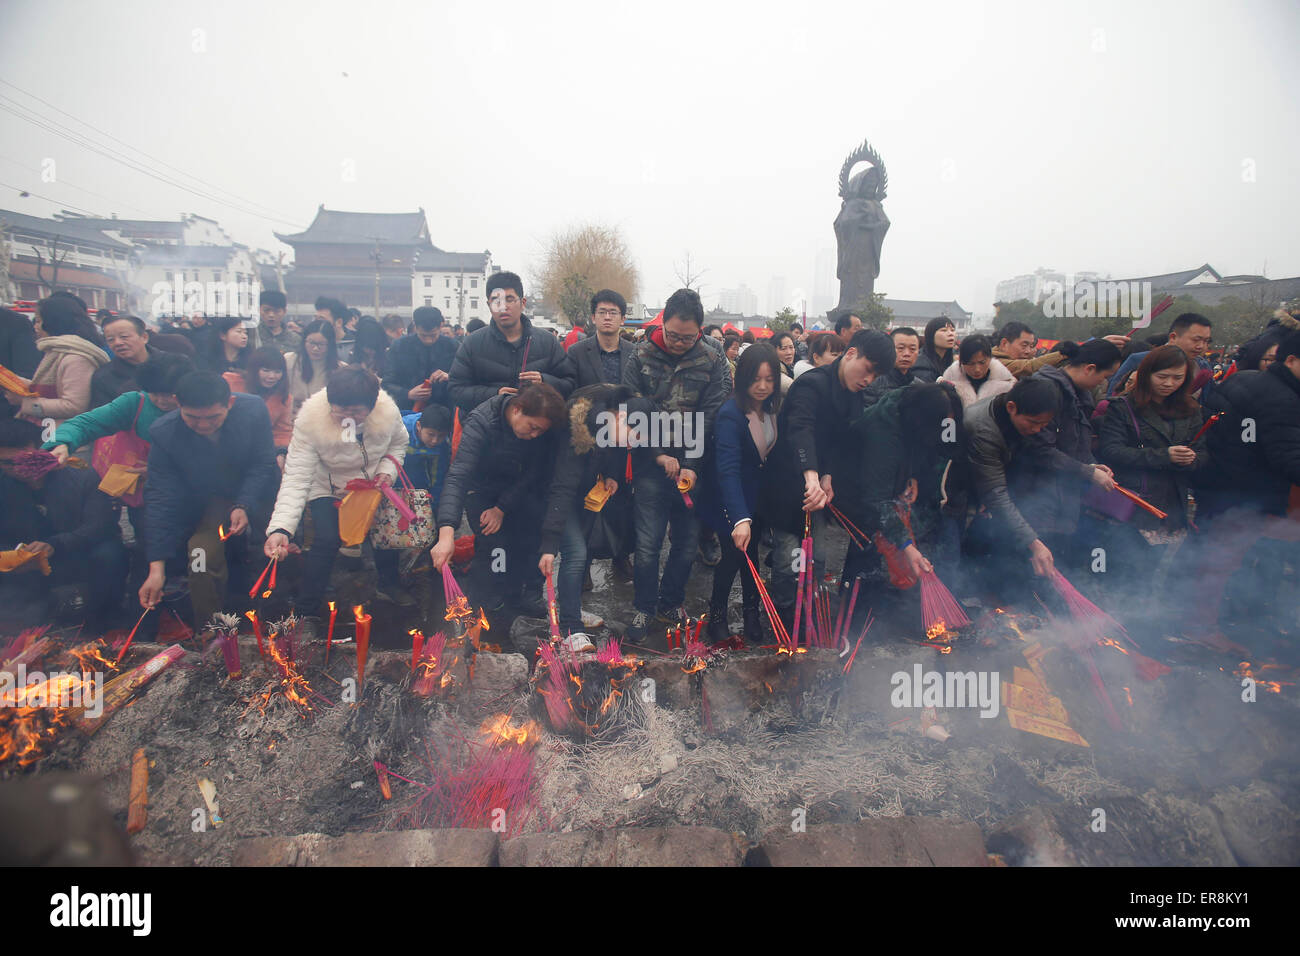 Feb 23, 2015-Wuhan, China- Chinese worshippers burn incenses to pray at the GuiyuanTemple in the hope that it brings them prospe Stock Photo